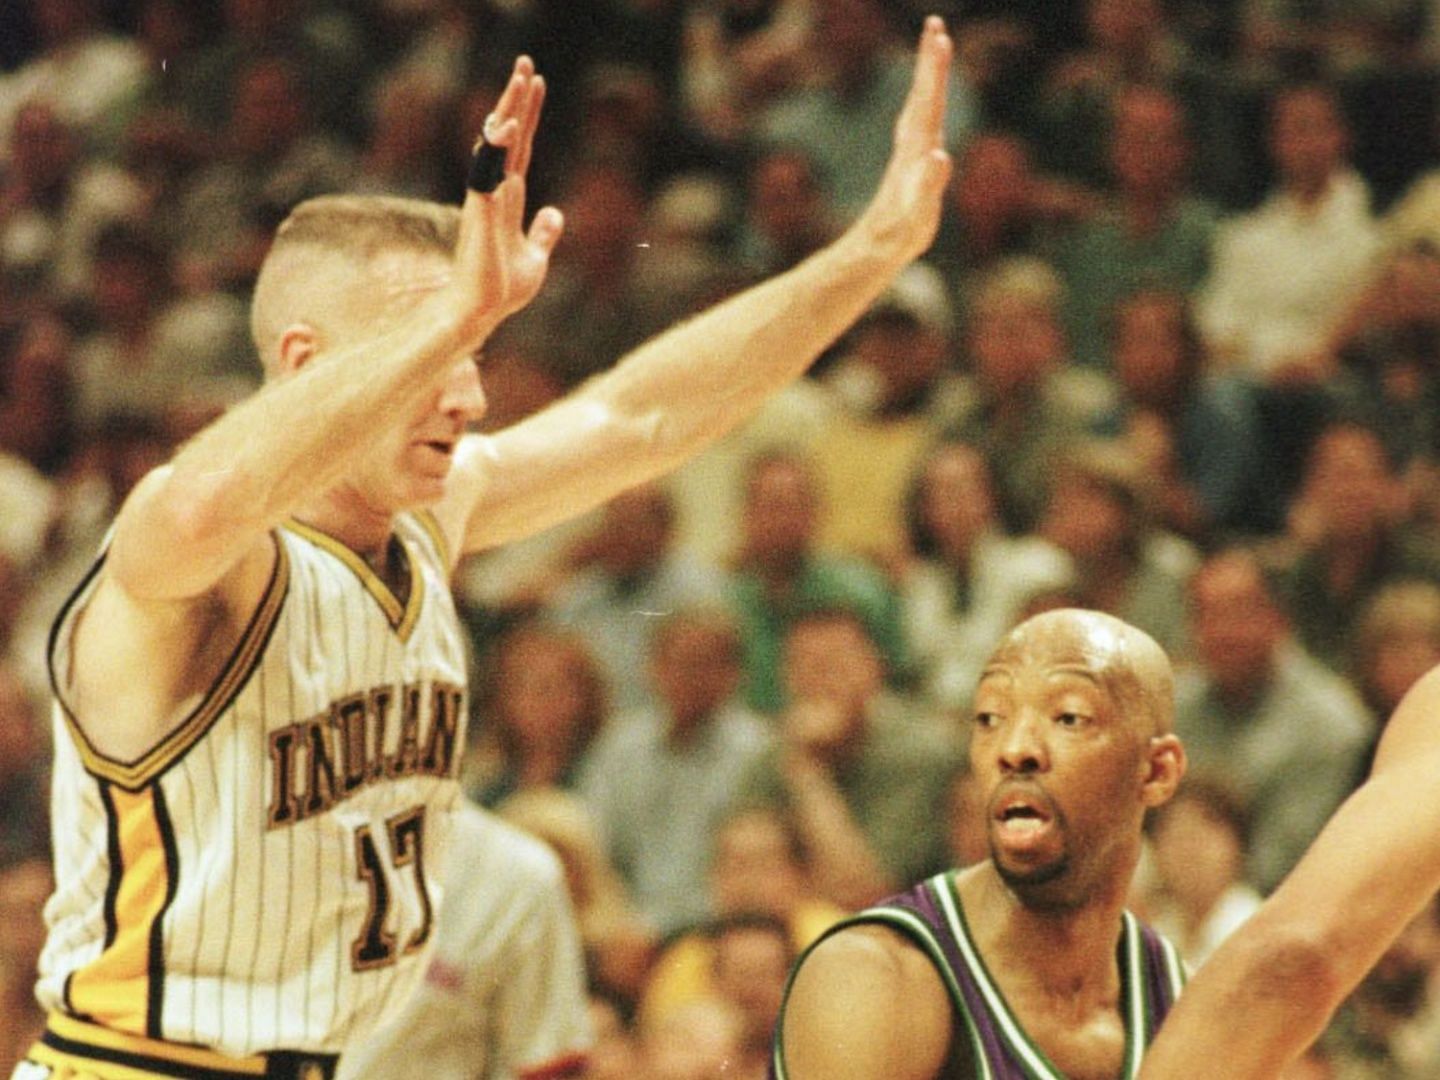 Indiana Pacers vs Milwaukee Bucks in the first round of the 1999 NBA playoffs.